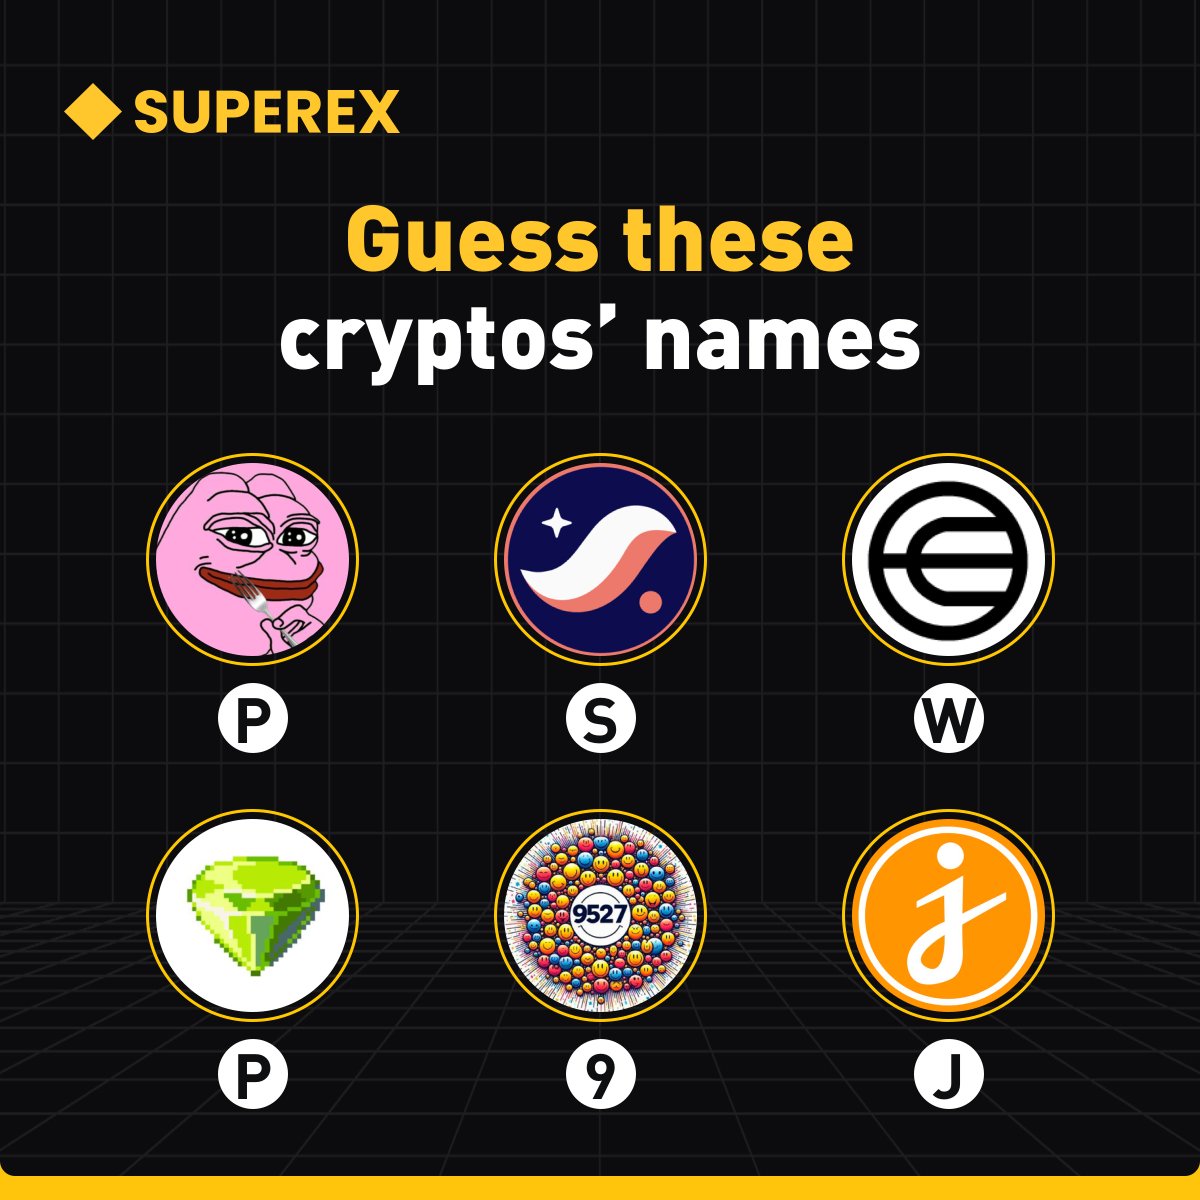 Guess these #crypto's names👀 $100 worth of futures trading fee coupons to #giveaway to 10 people! $10 coupon each.💰 1⃣Follow @SuperExet and @SCS_CHAIN 2⃣Comment your answers below & tag 3 friends